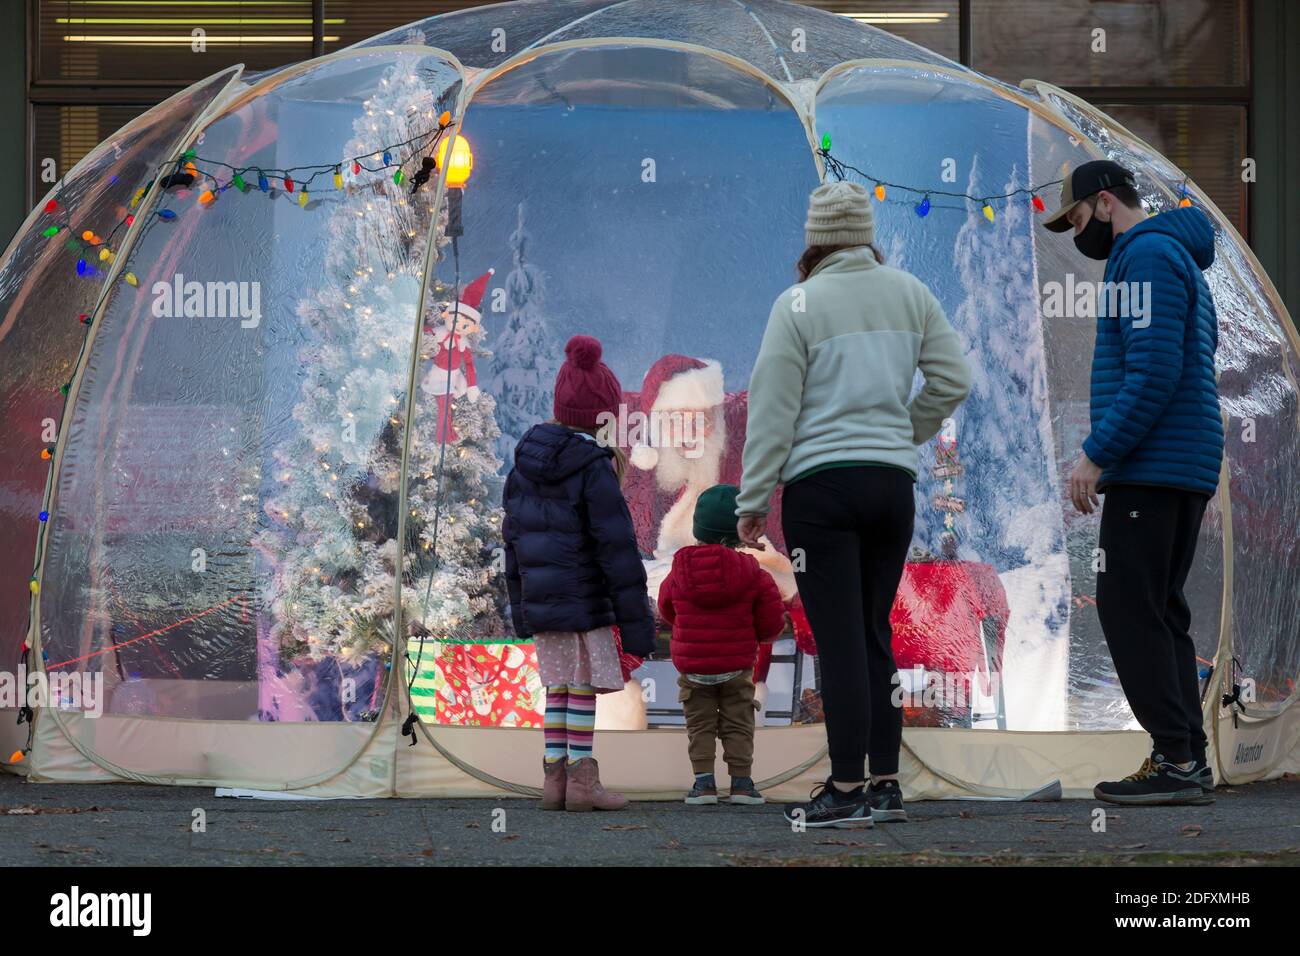 Seattle, Washington, USA. 6th December, 2020. Dan Kemmis, known as the Seattle Santa, greets a young family from within a protective plastic bubble in Seattle’s Greenwood neighborhood. Unable to schedule private events due to the coronavirus pandemic, Kemmis is making physically distanced public appearances with some donations benefiting local homeless shelters. Credit: Paul Christian Gordon/Alamy Live News Stock Photo